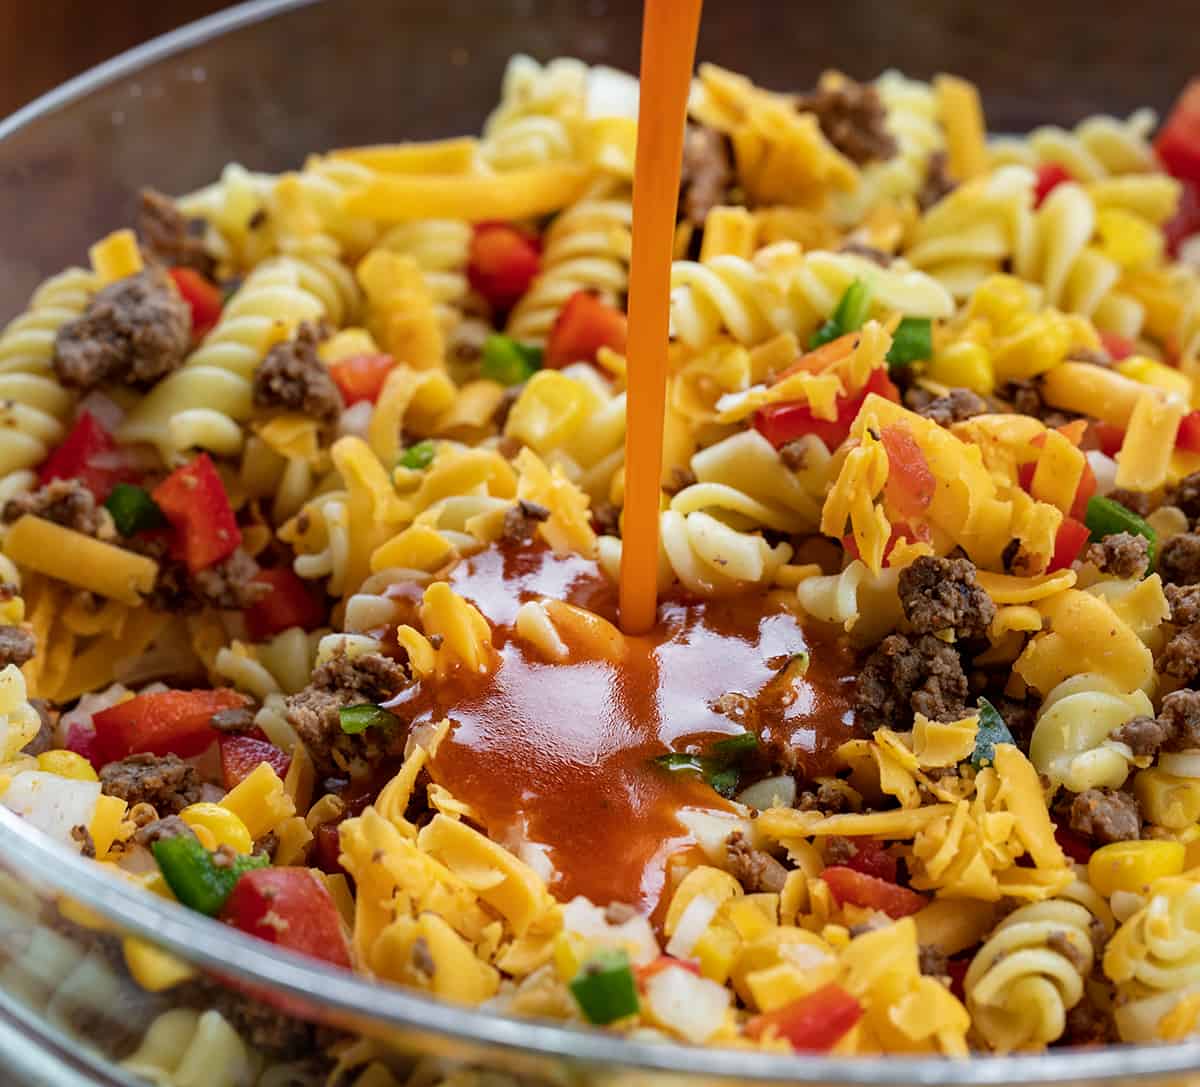 Pouring Dressing Over Taco Pasta Salad.